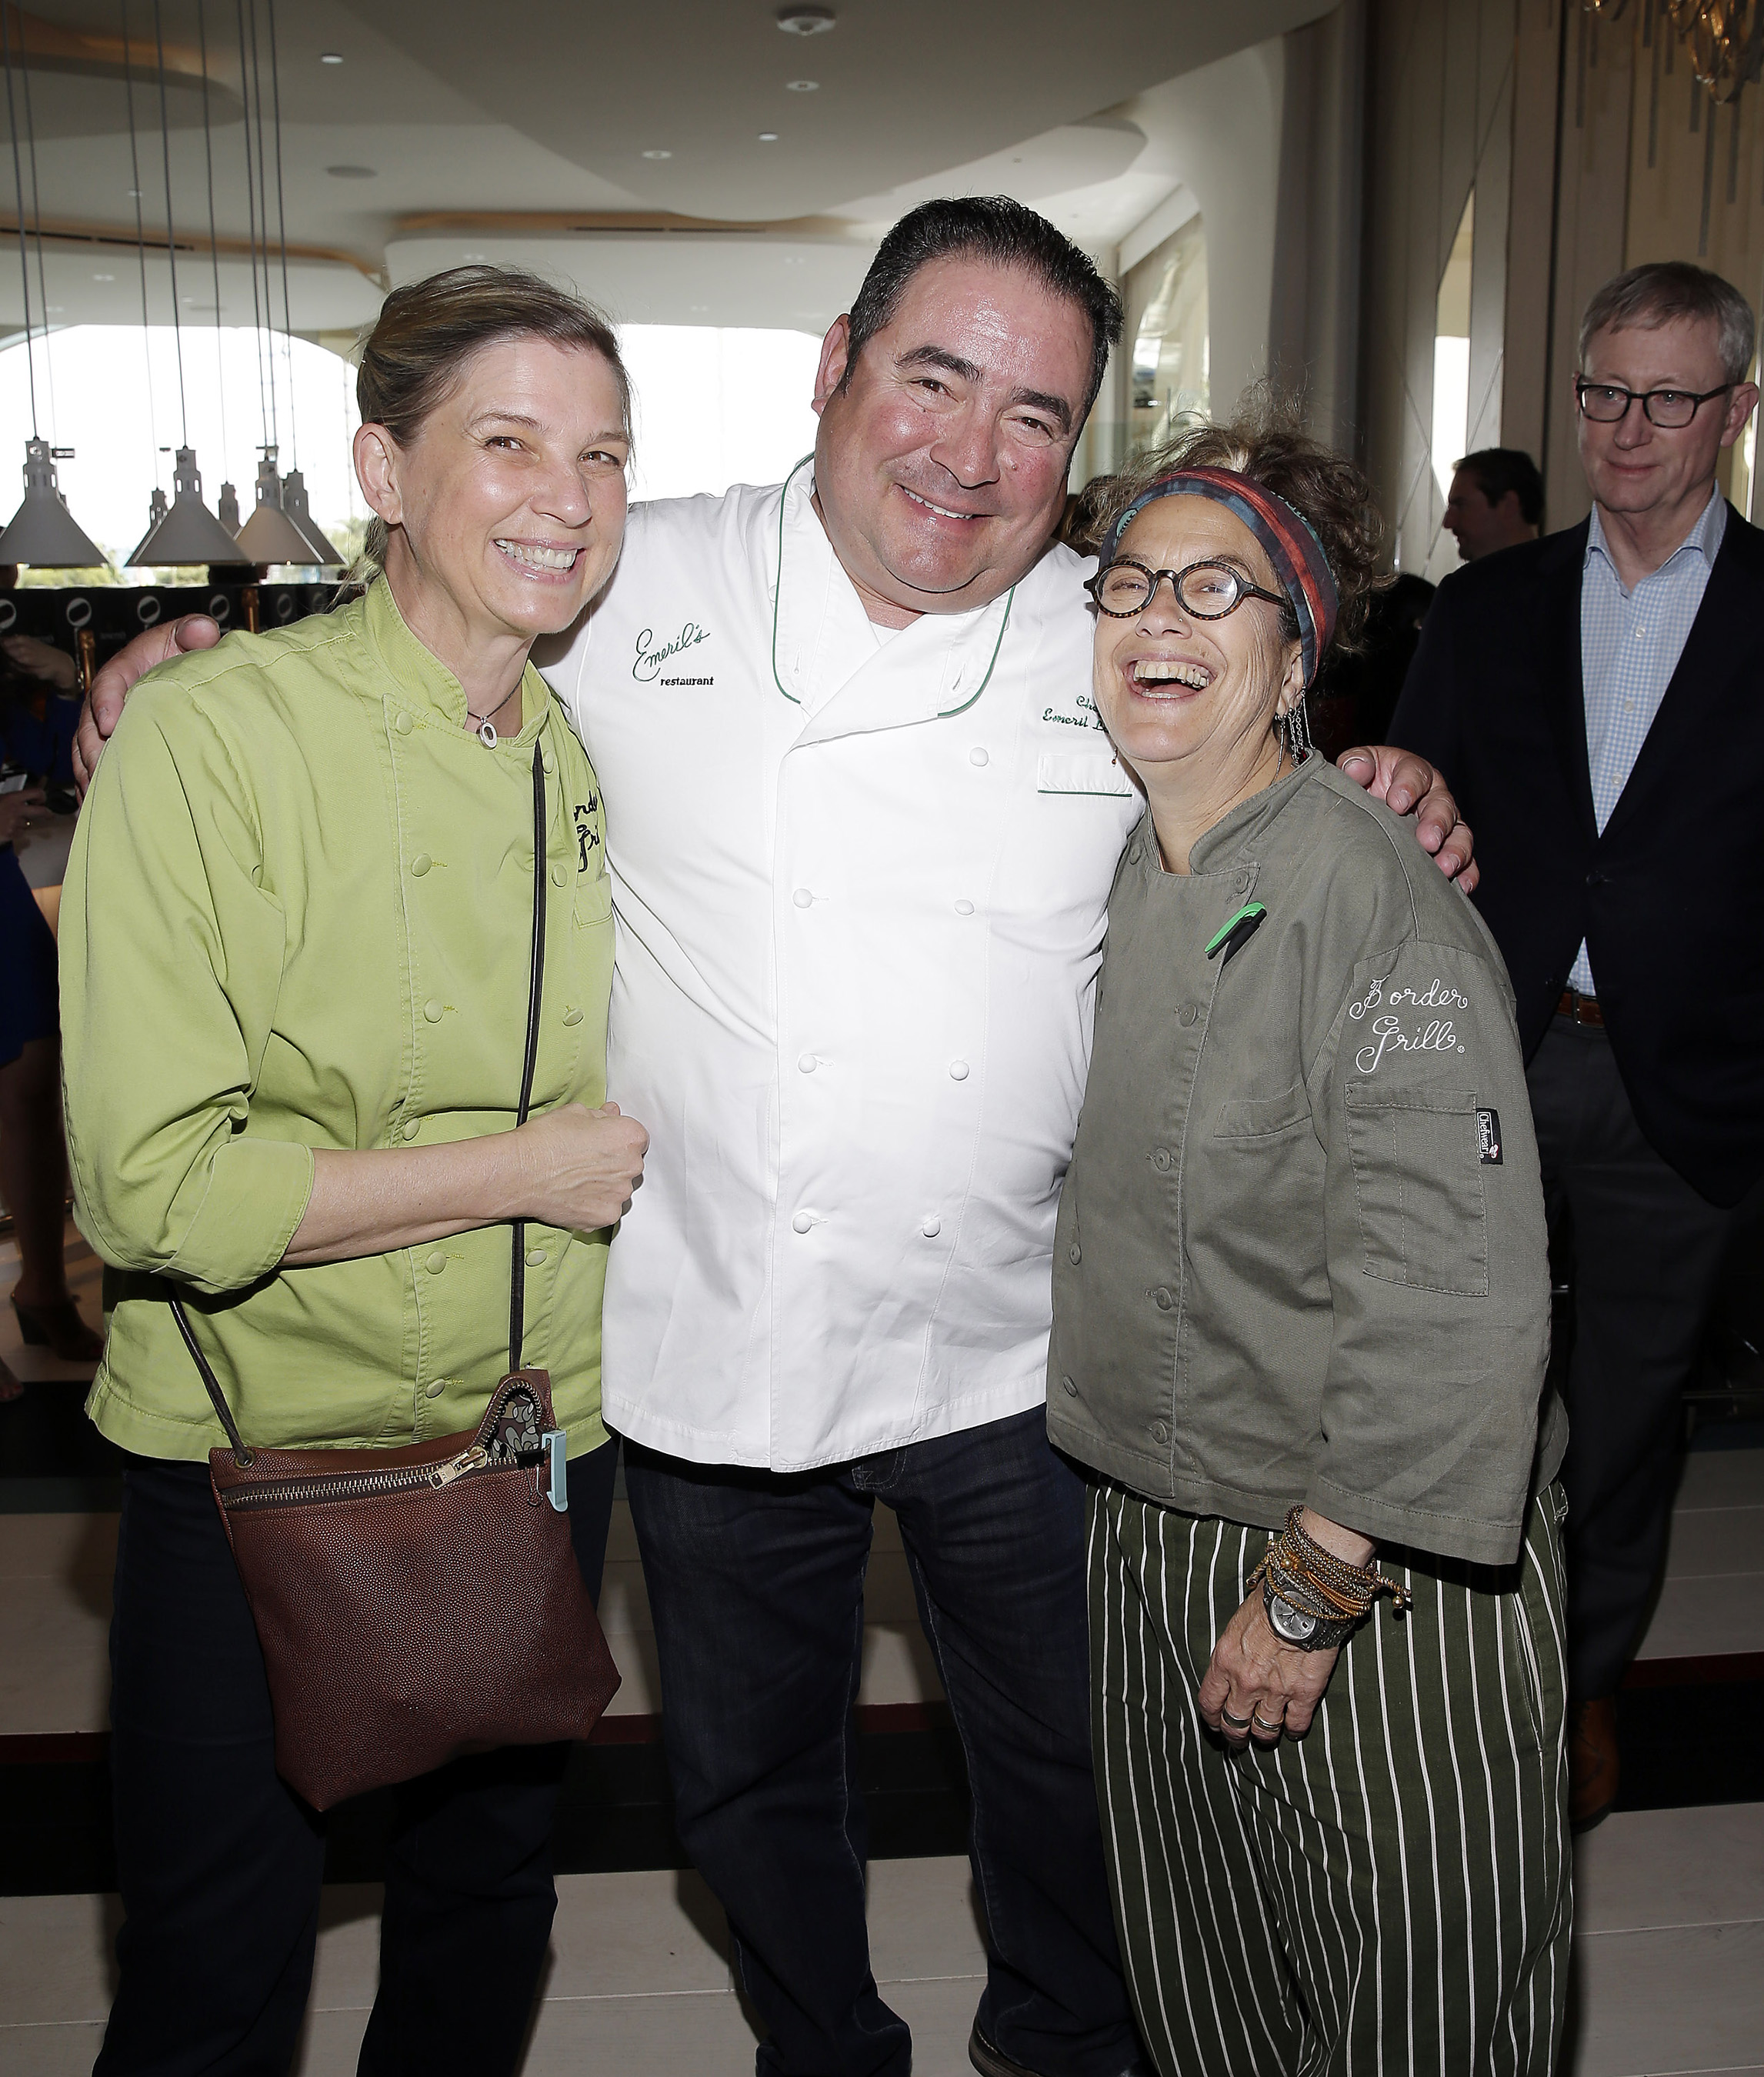 Mary Sue Milliken, Emeril Lagasse and Susan Feniger